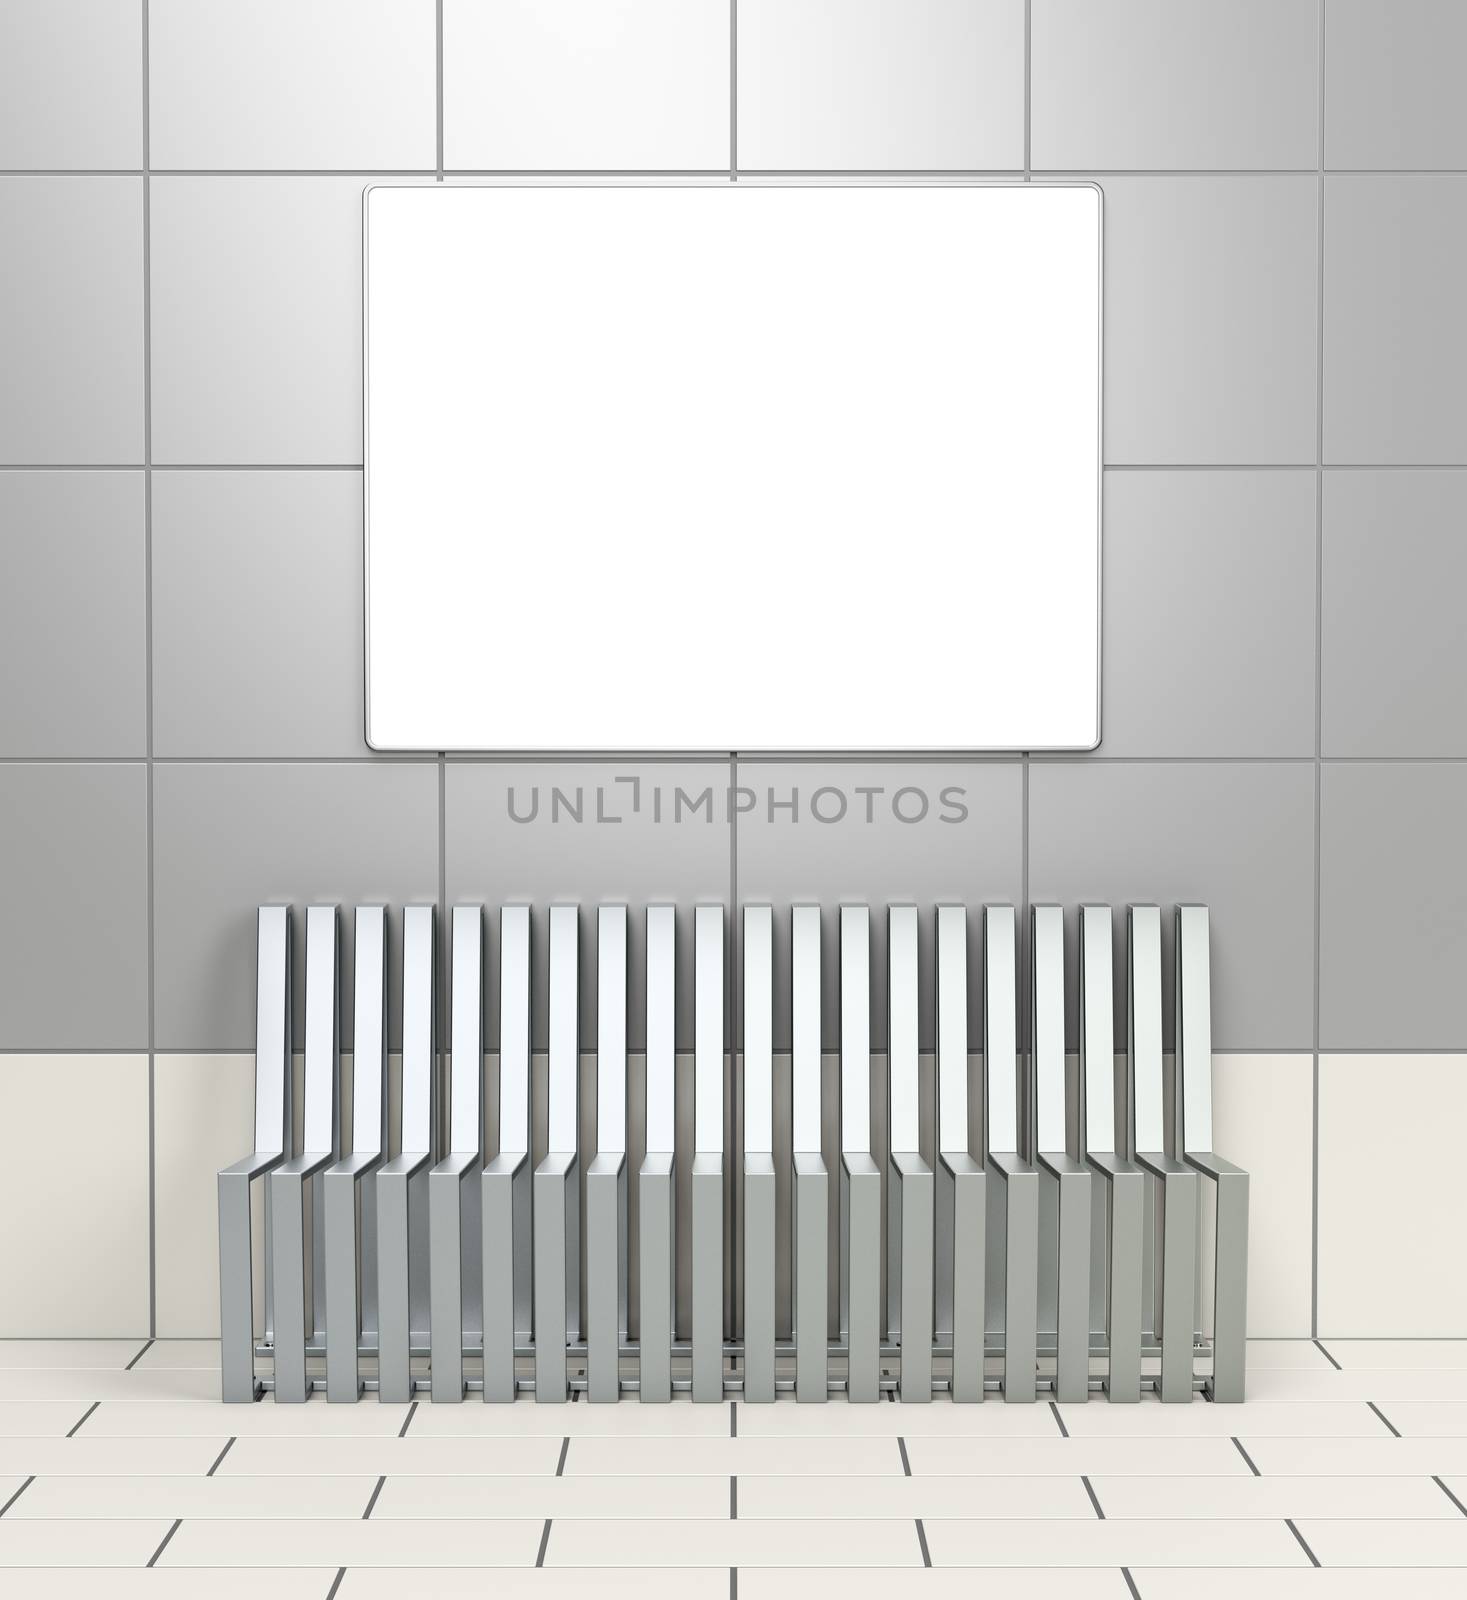 Blank billboard and waiting bench by magraphics